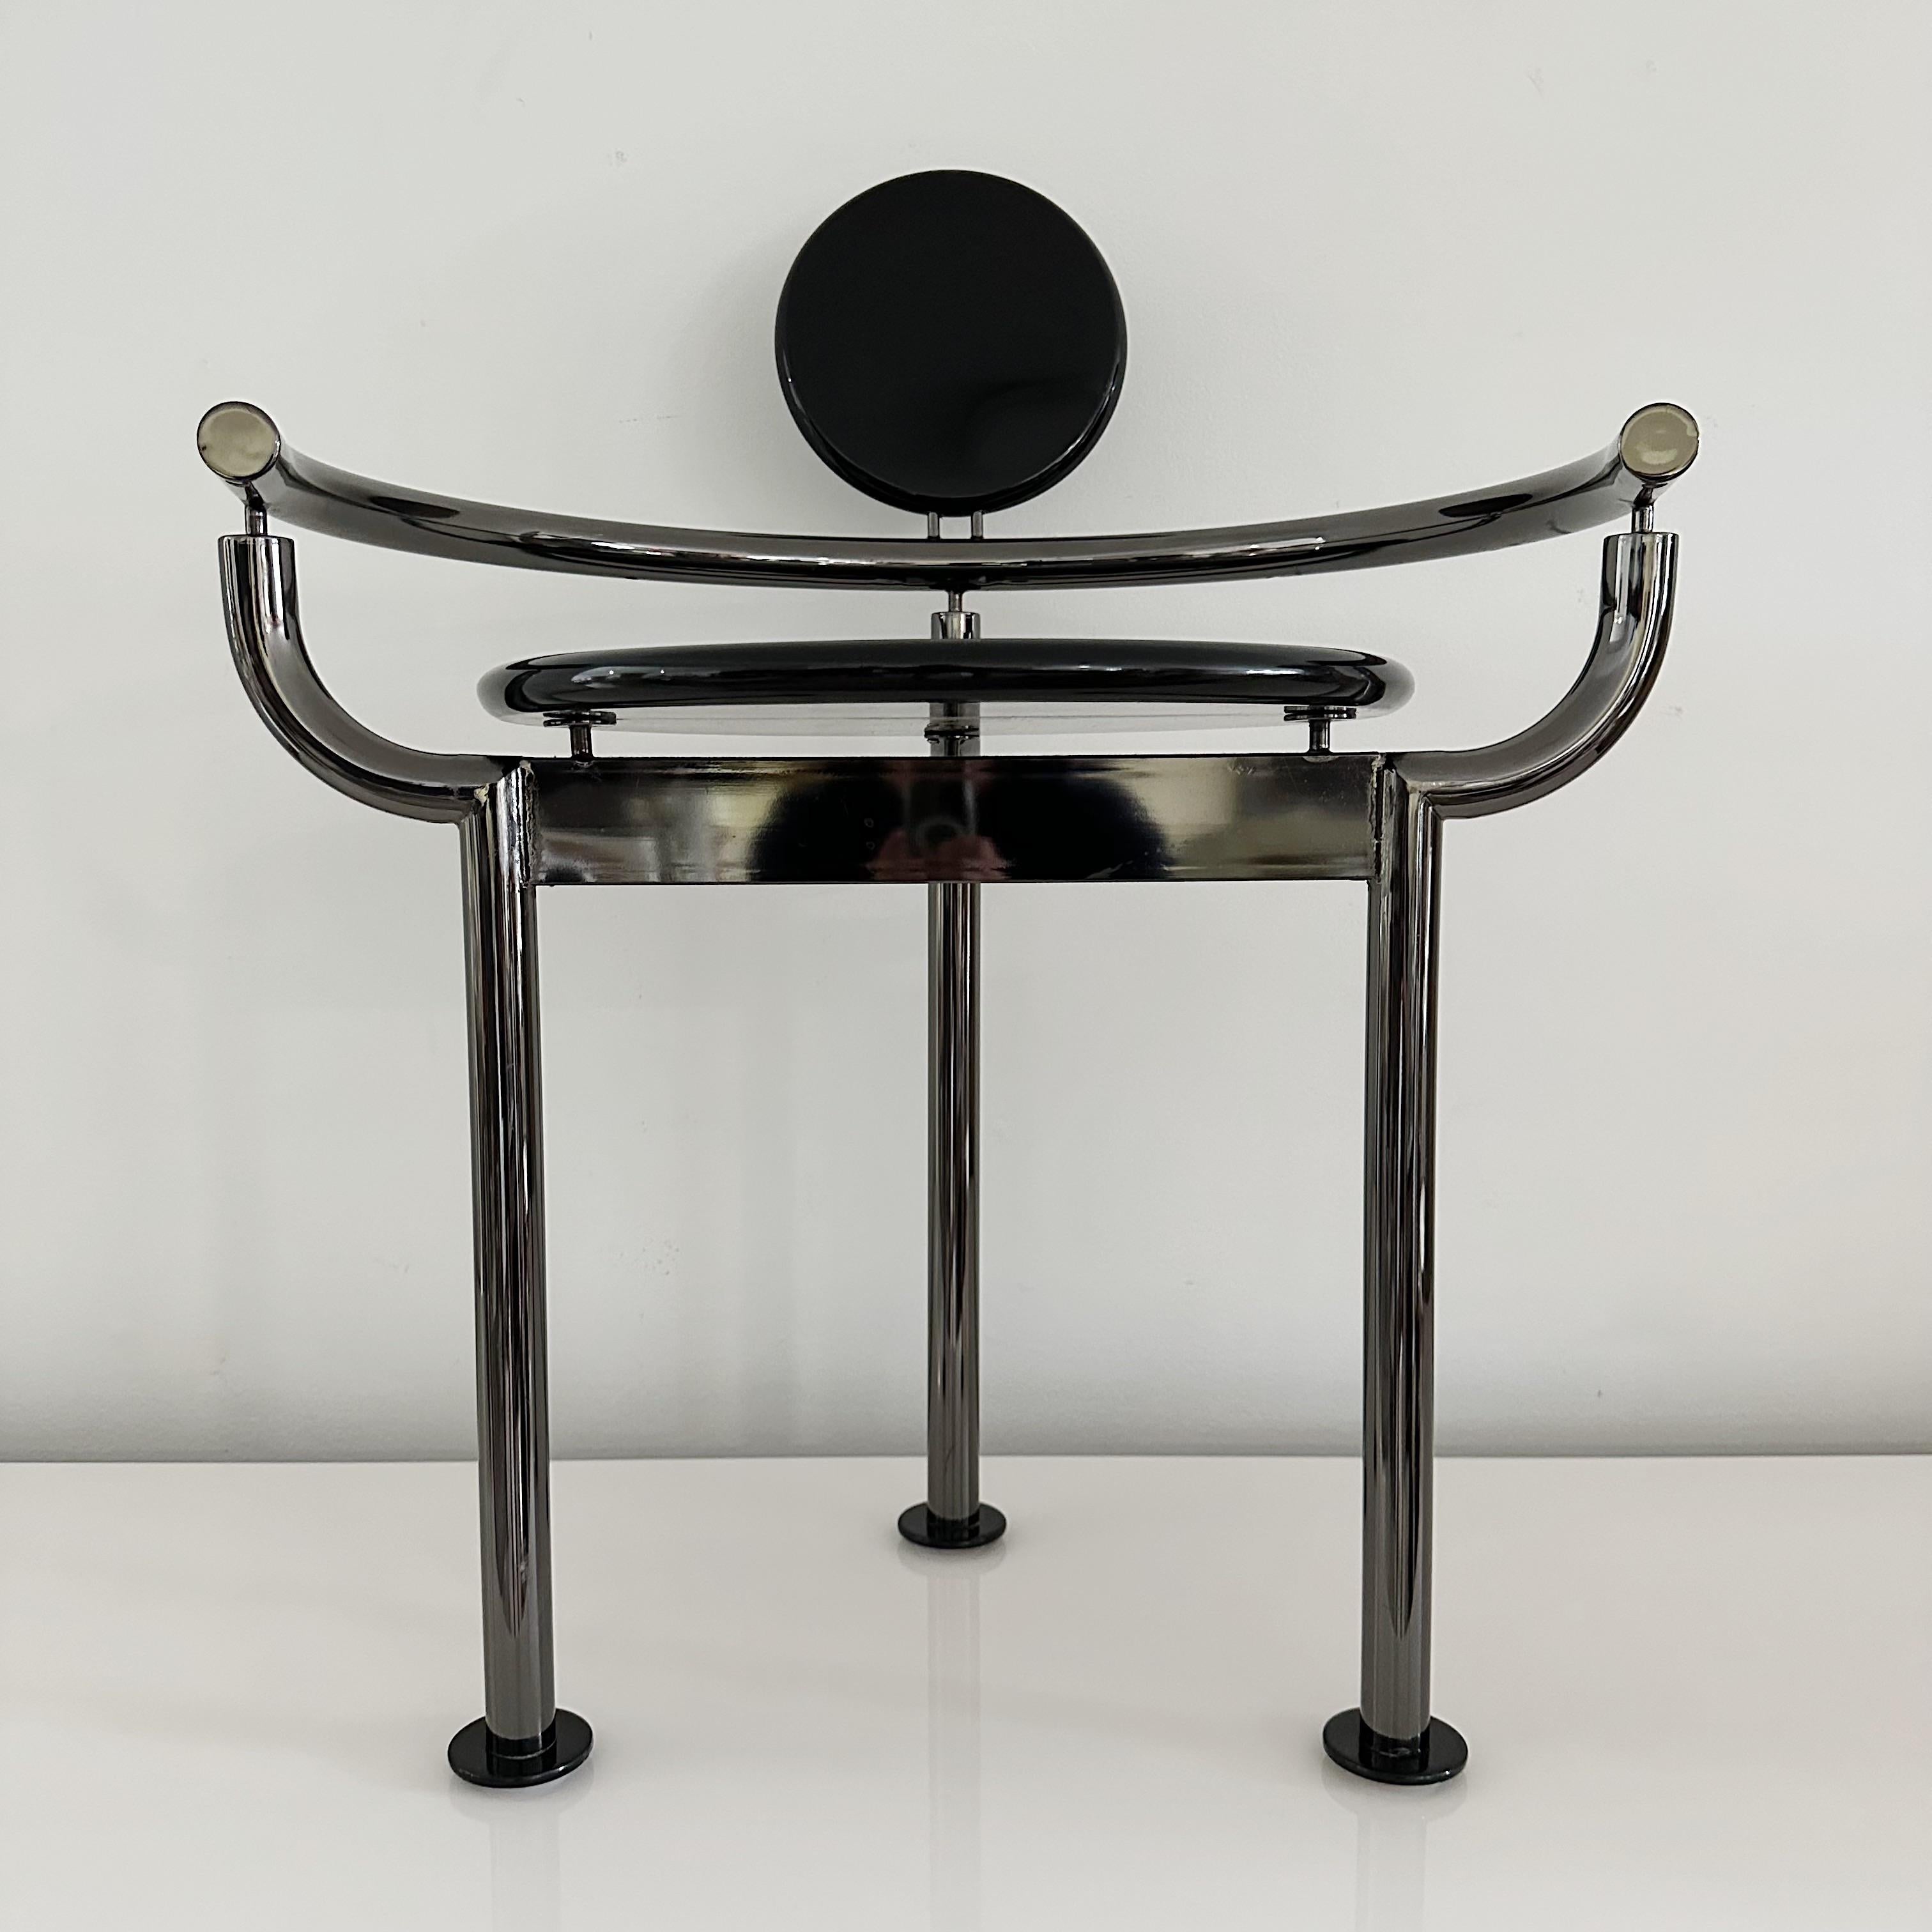 Vintage Black Lacquer & Gunmetal Accent Vanity Chair
Description
A sculptural chair inspired by the iconic Memphis design style. Crafted from metal, it features a sleek gunmetal finish, while the wood seat and backrest are finished with a striking